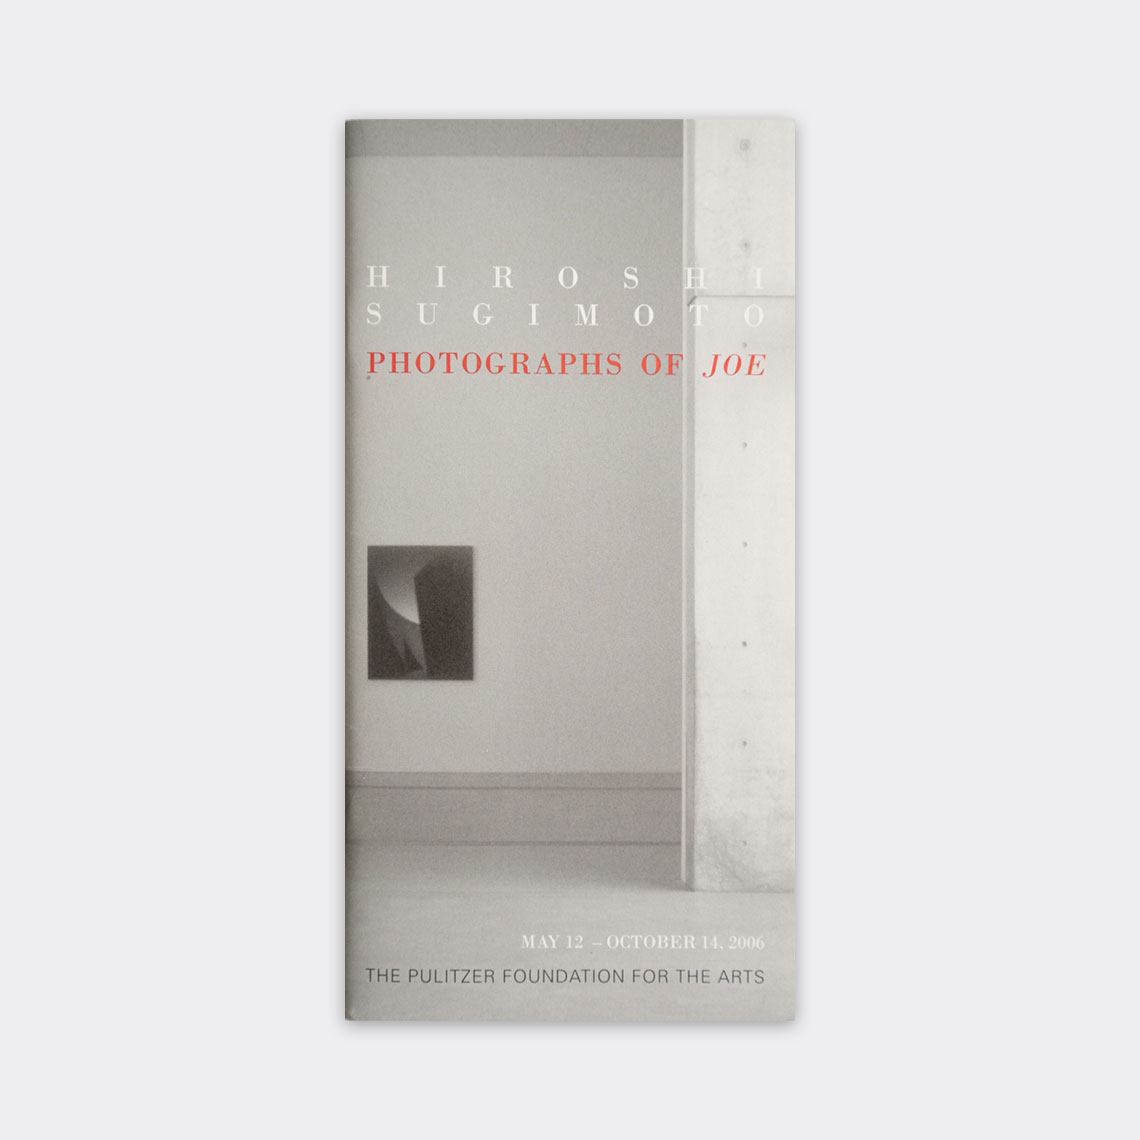 The exhibition guide cover for "Hiroshi Sugimoto: Photographs of 'Joe.'"